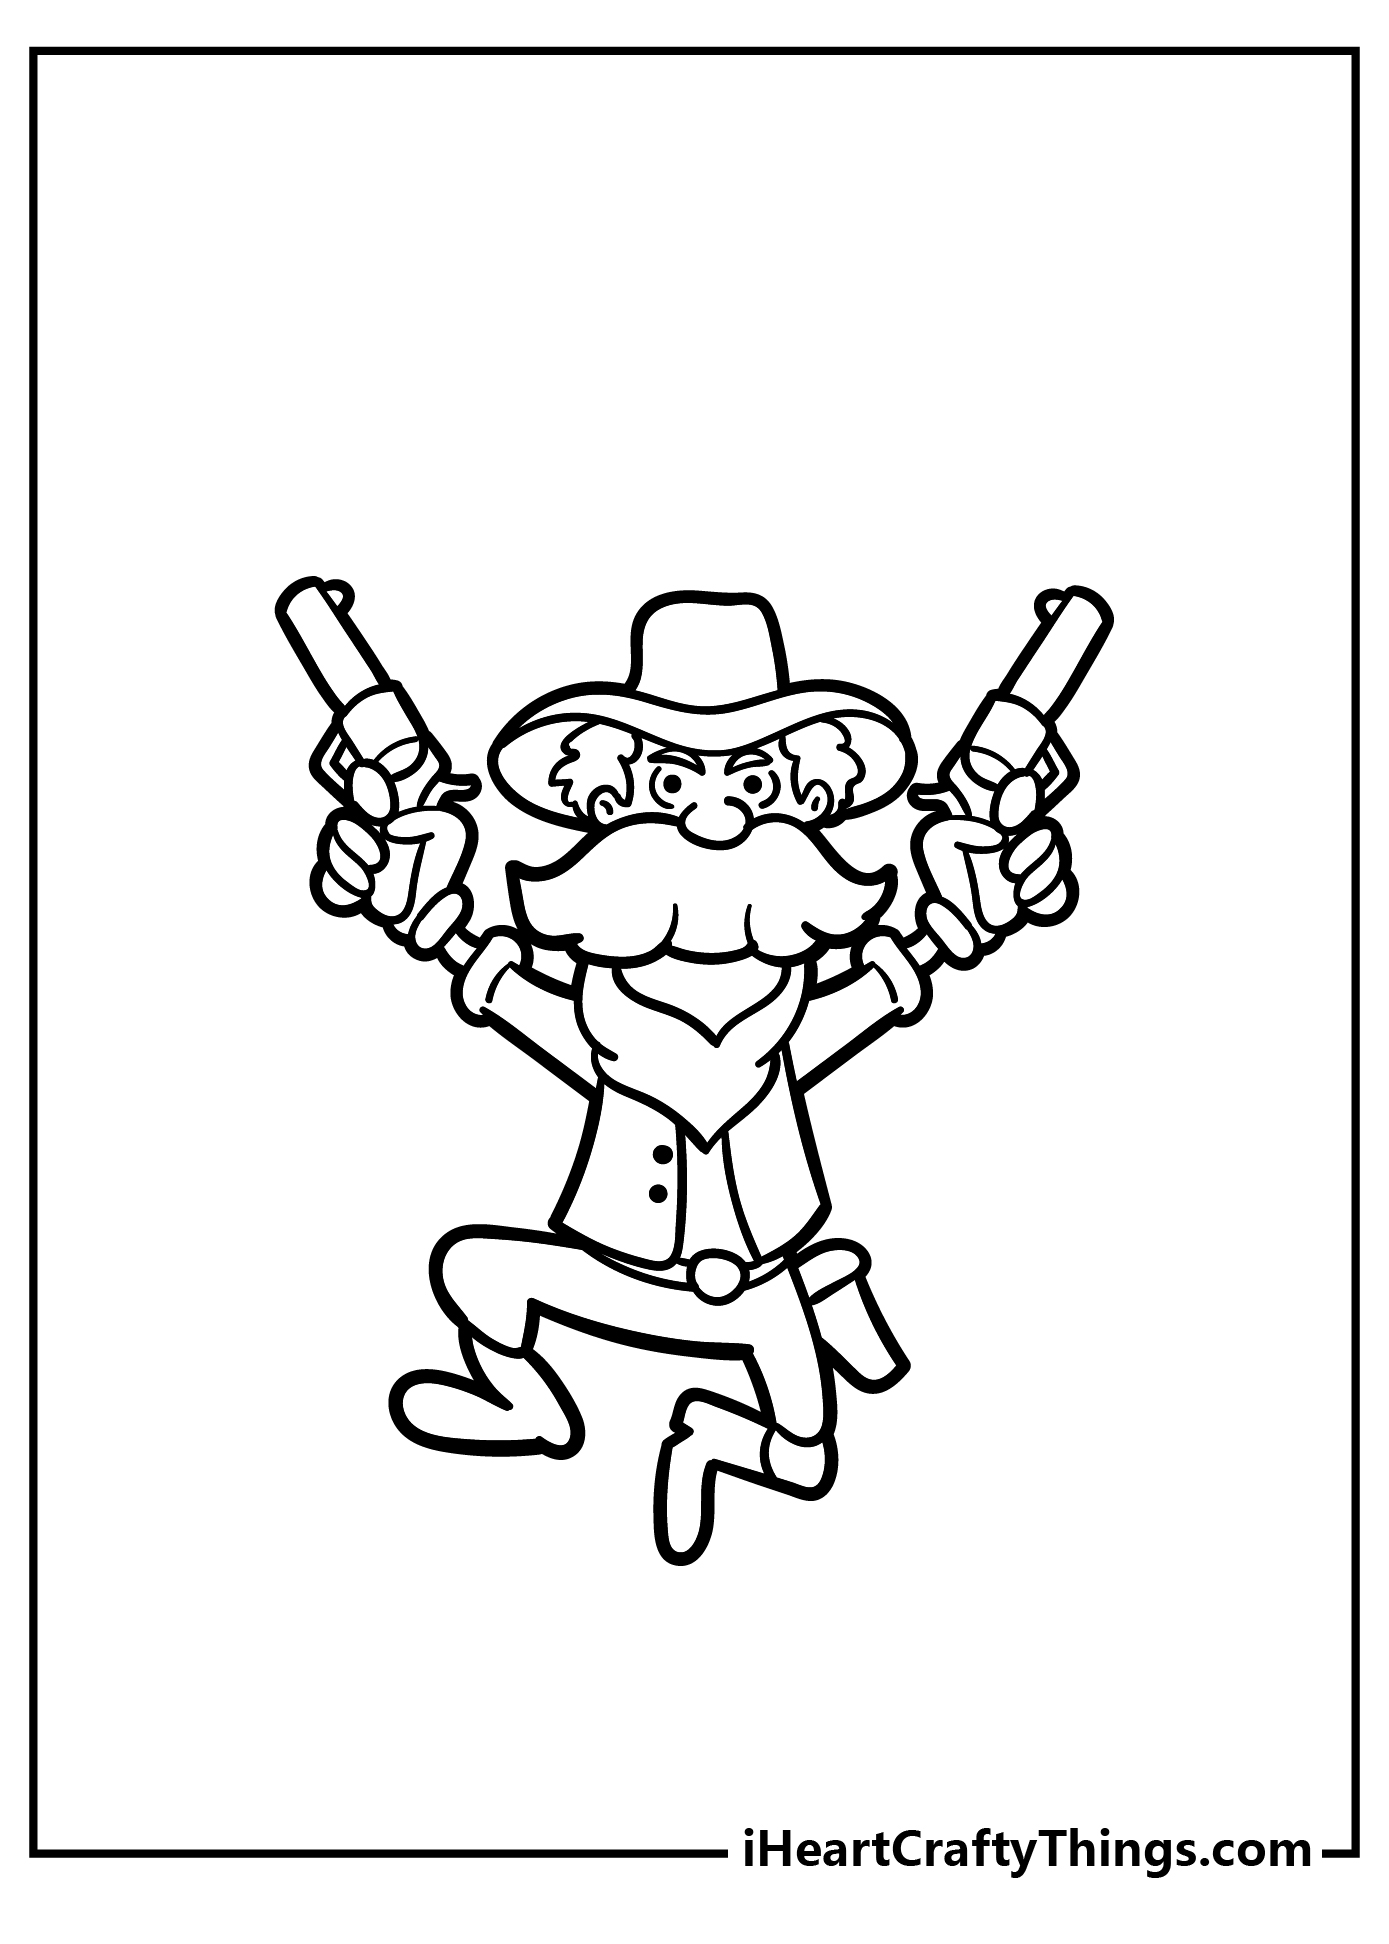 Cowboy Coloring Book for adults free download